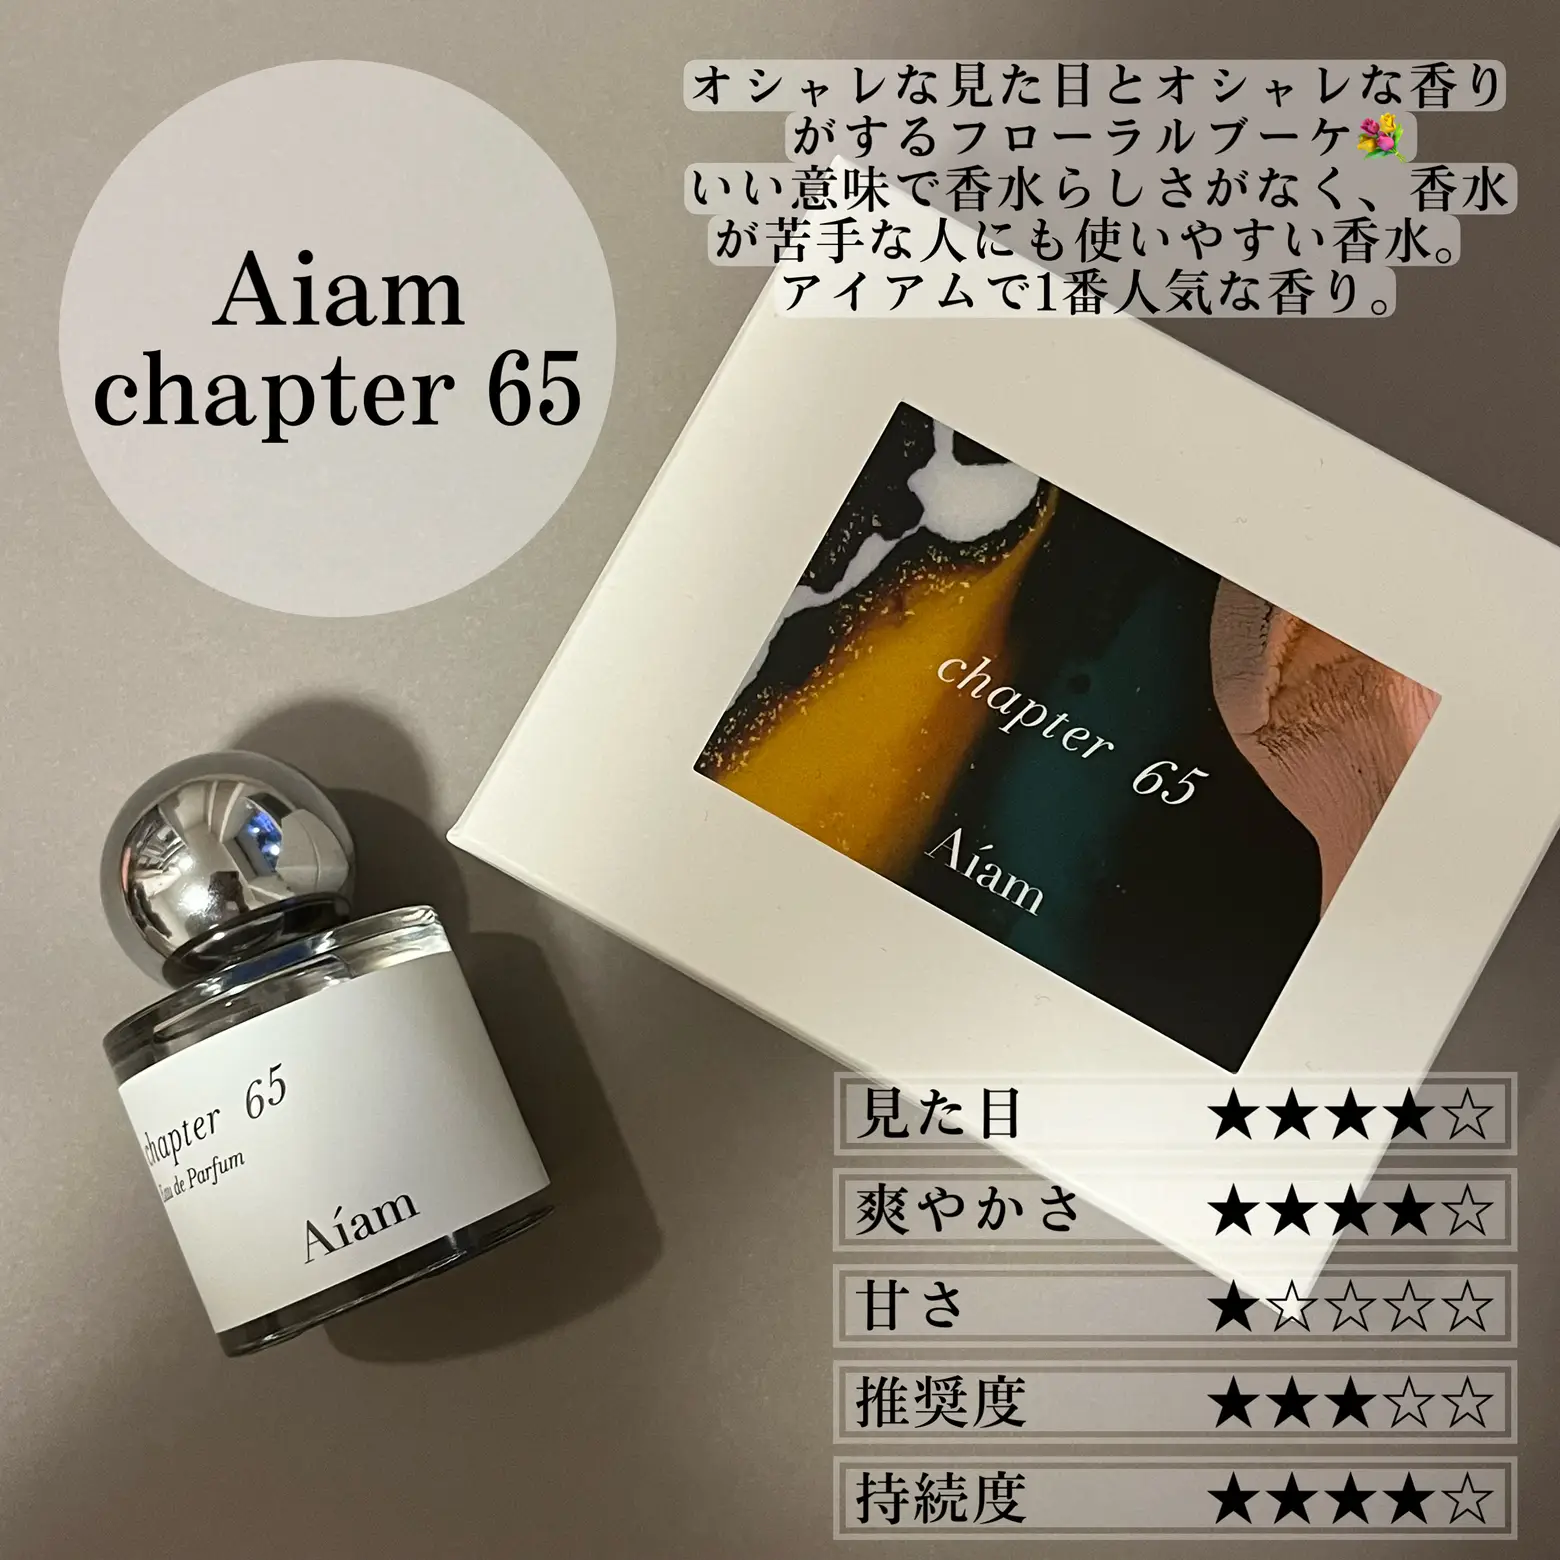 Recommended perfume ✨ million people recommended perfume